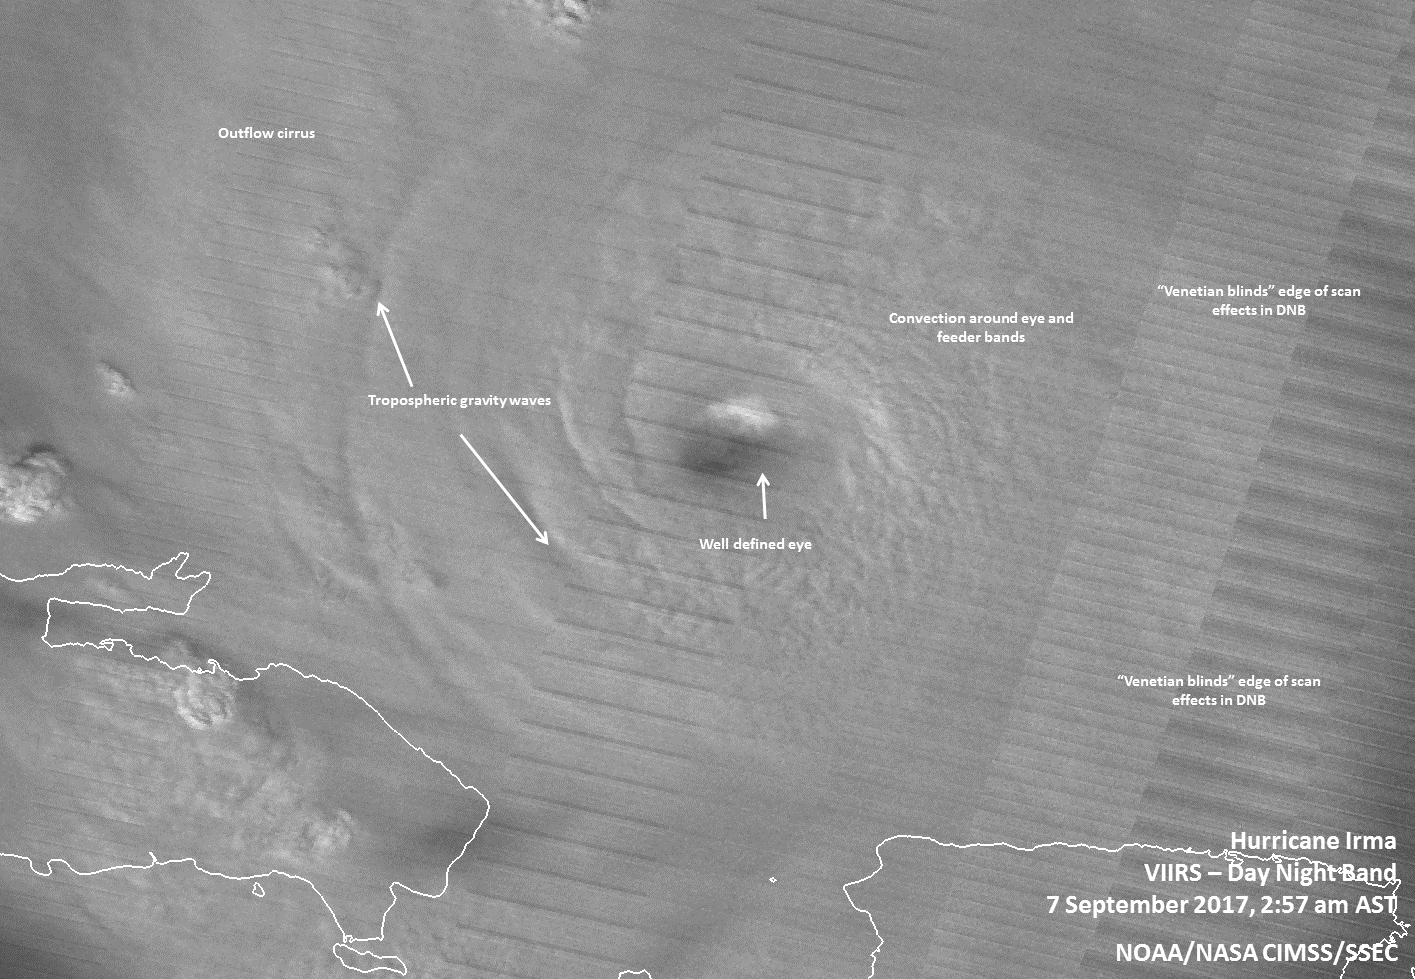 Nighttime satellite image of Irma in black and white. The storm clouds fill the entire screen, with arrows pointing to gravity waves and the well-defined eye.